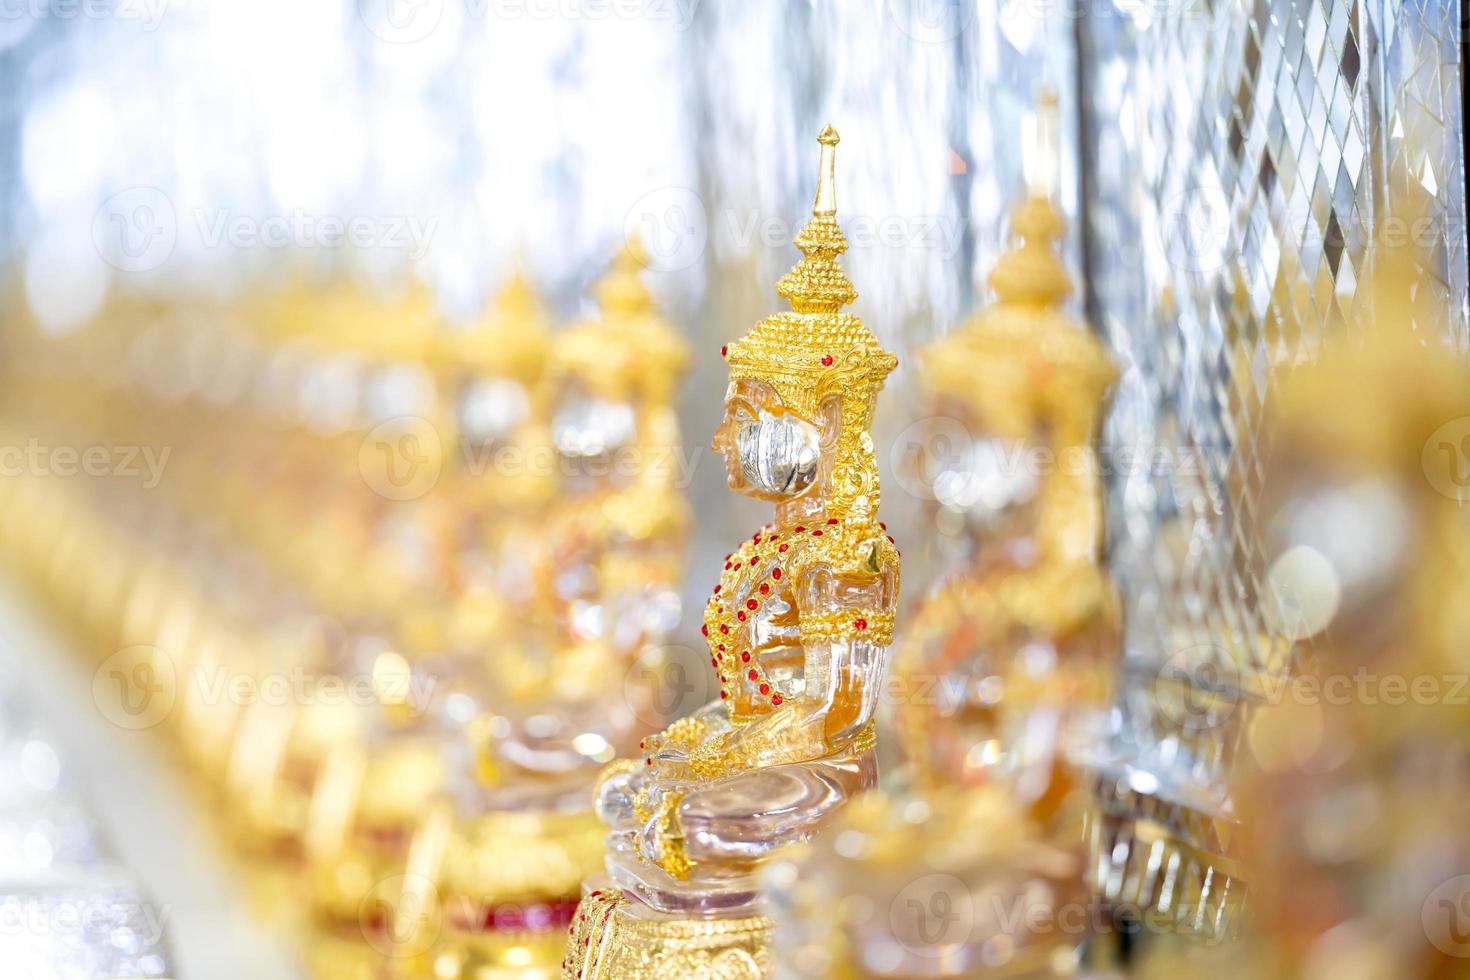 Transparent crystal Buddha in Gold suit with blur bokeh shining background. photo